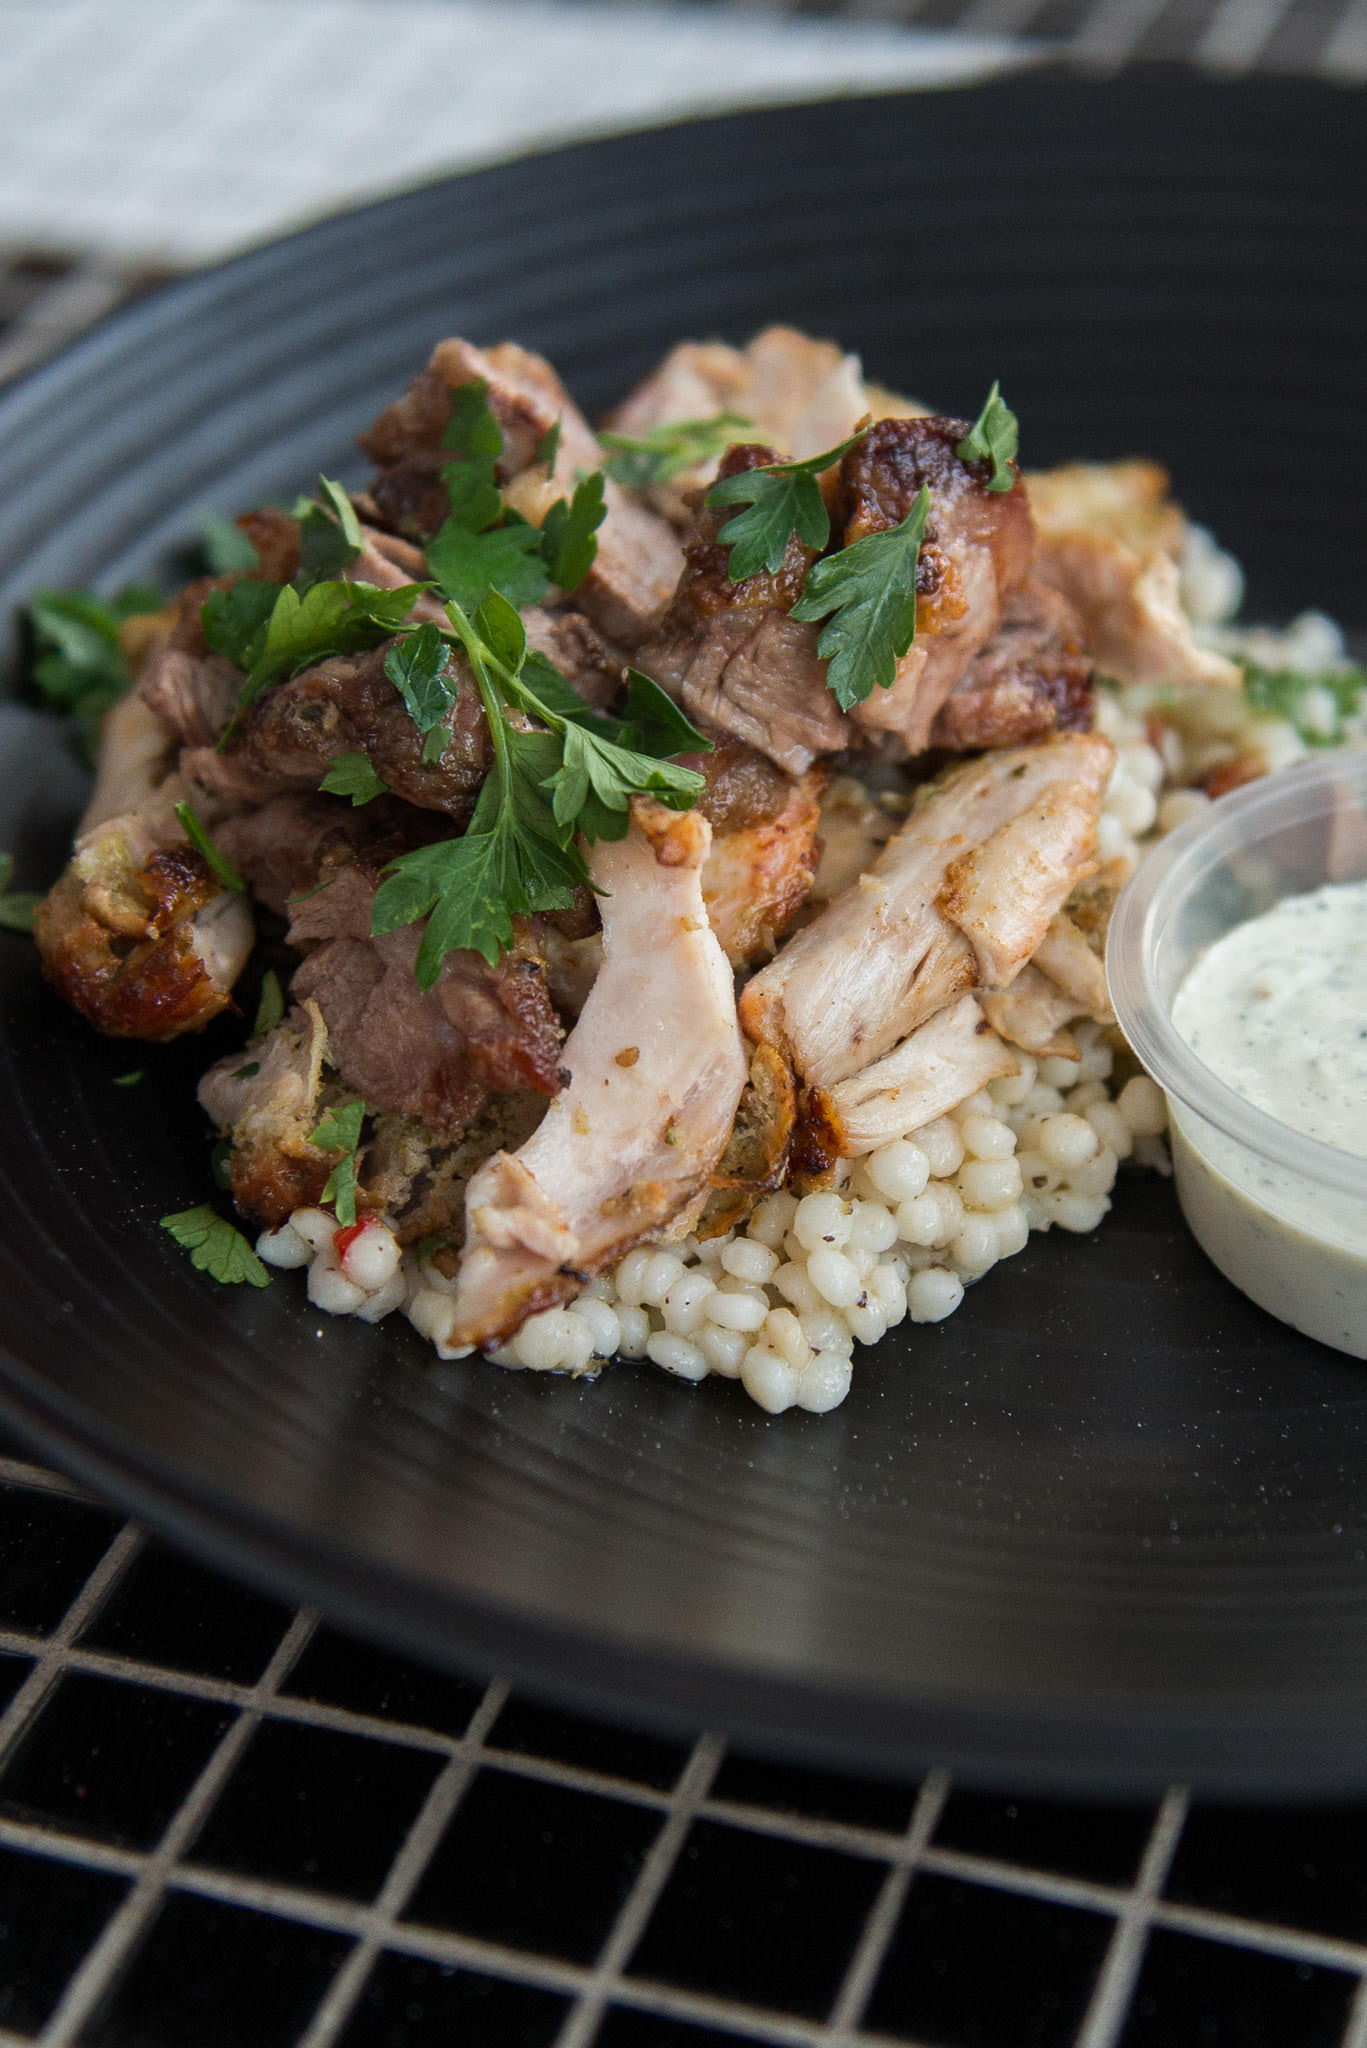 Marinated Arkady Margaret River lamb and Mount Barker chicken, cooked over charcoal, served with tzatziki and giant couscous (AU$27)